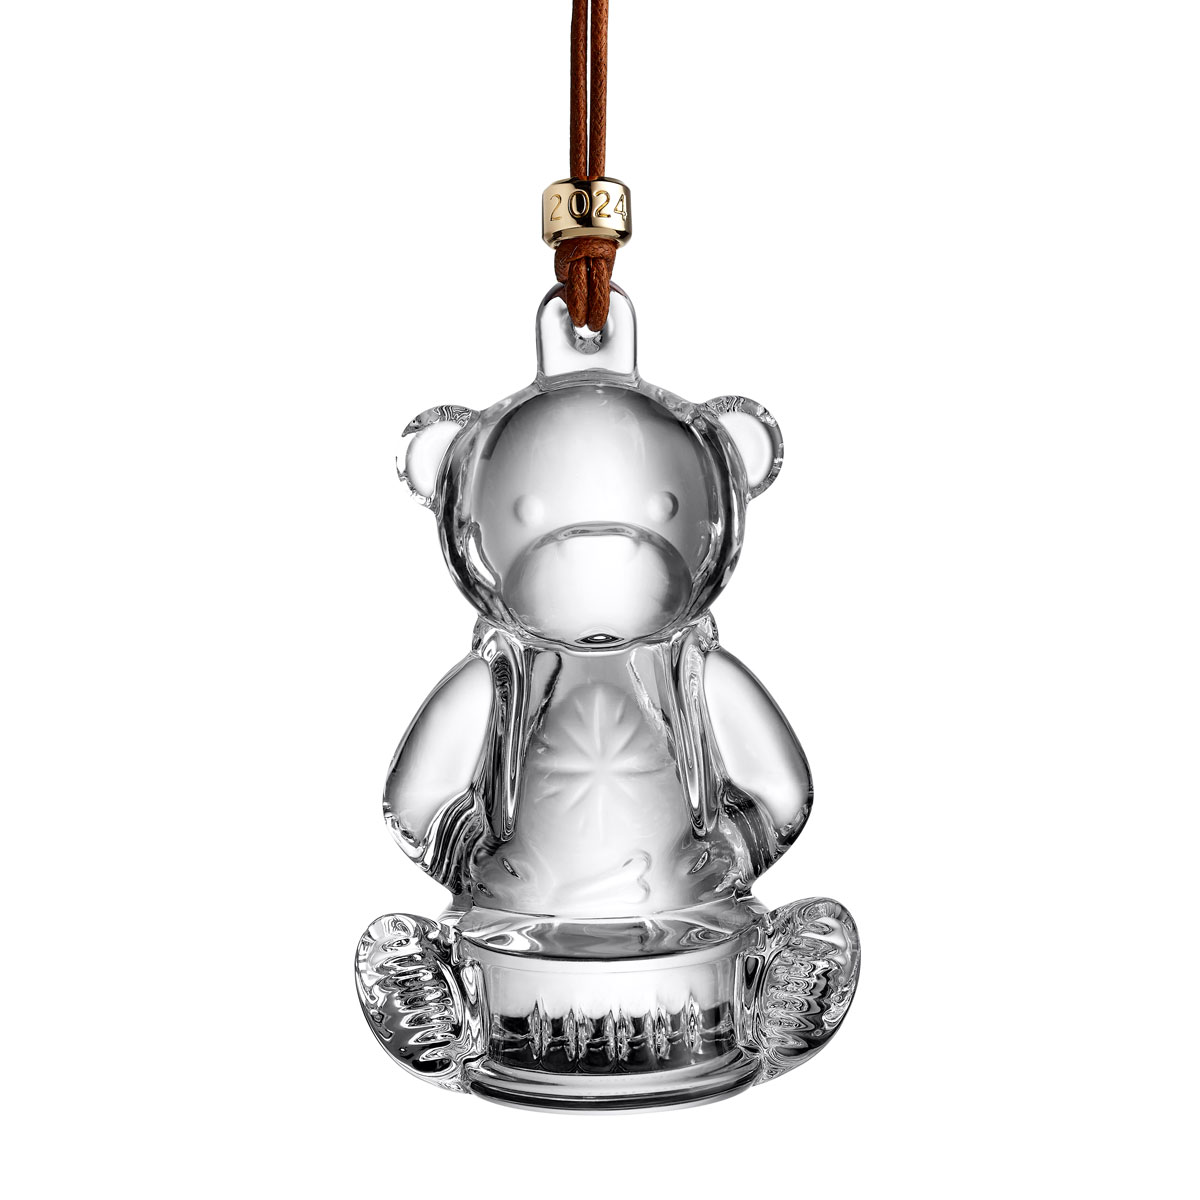 Waterford 2024 My First Bear Dated Ornament